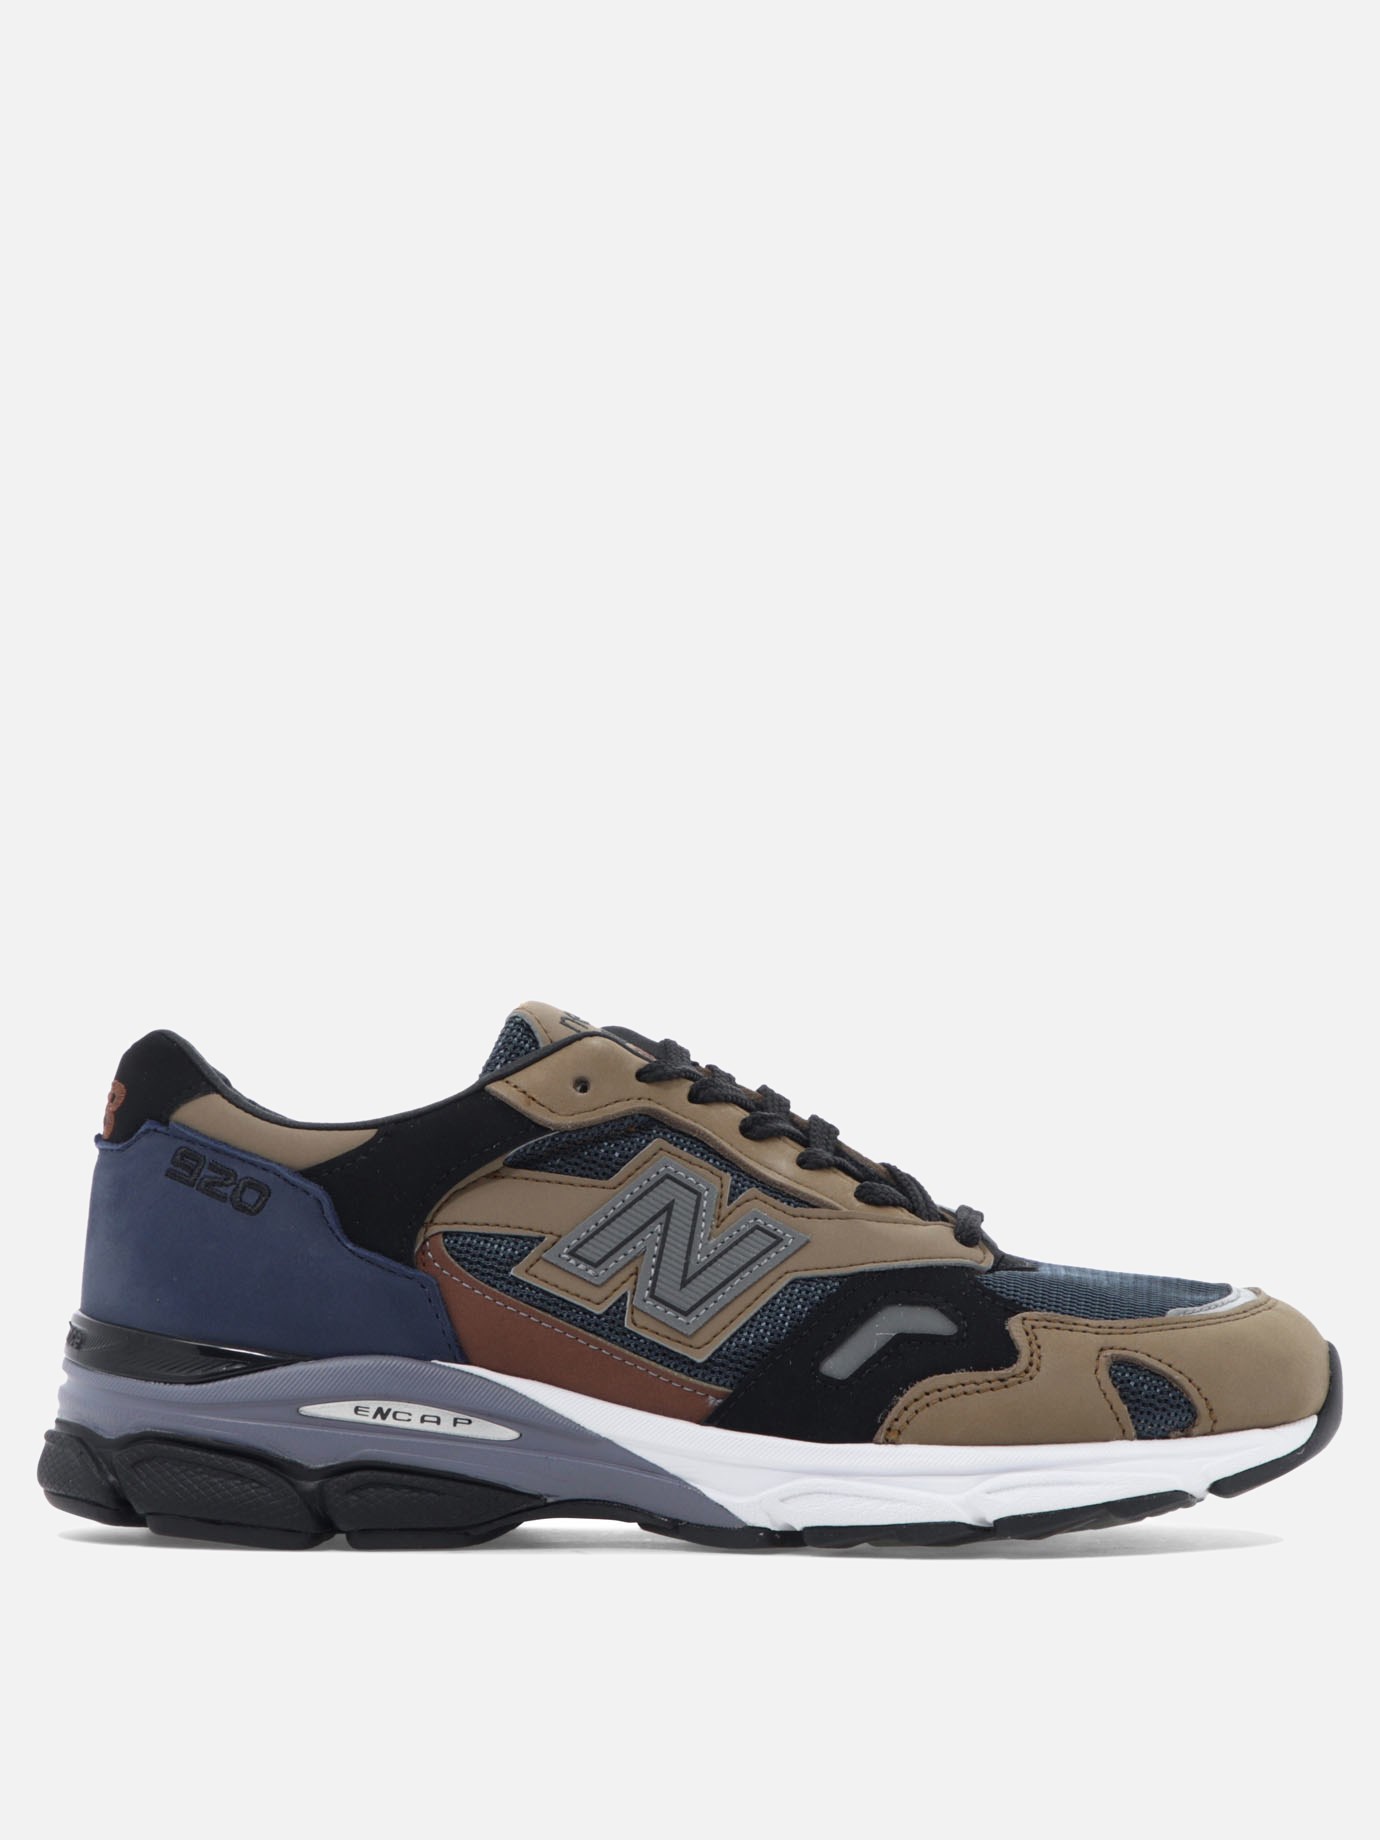 Sneaker  Made in UK 920 by New Balance - 5